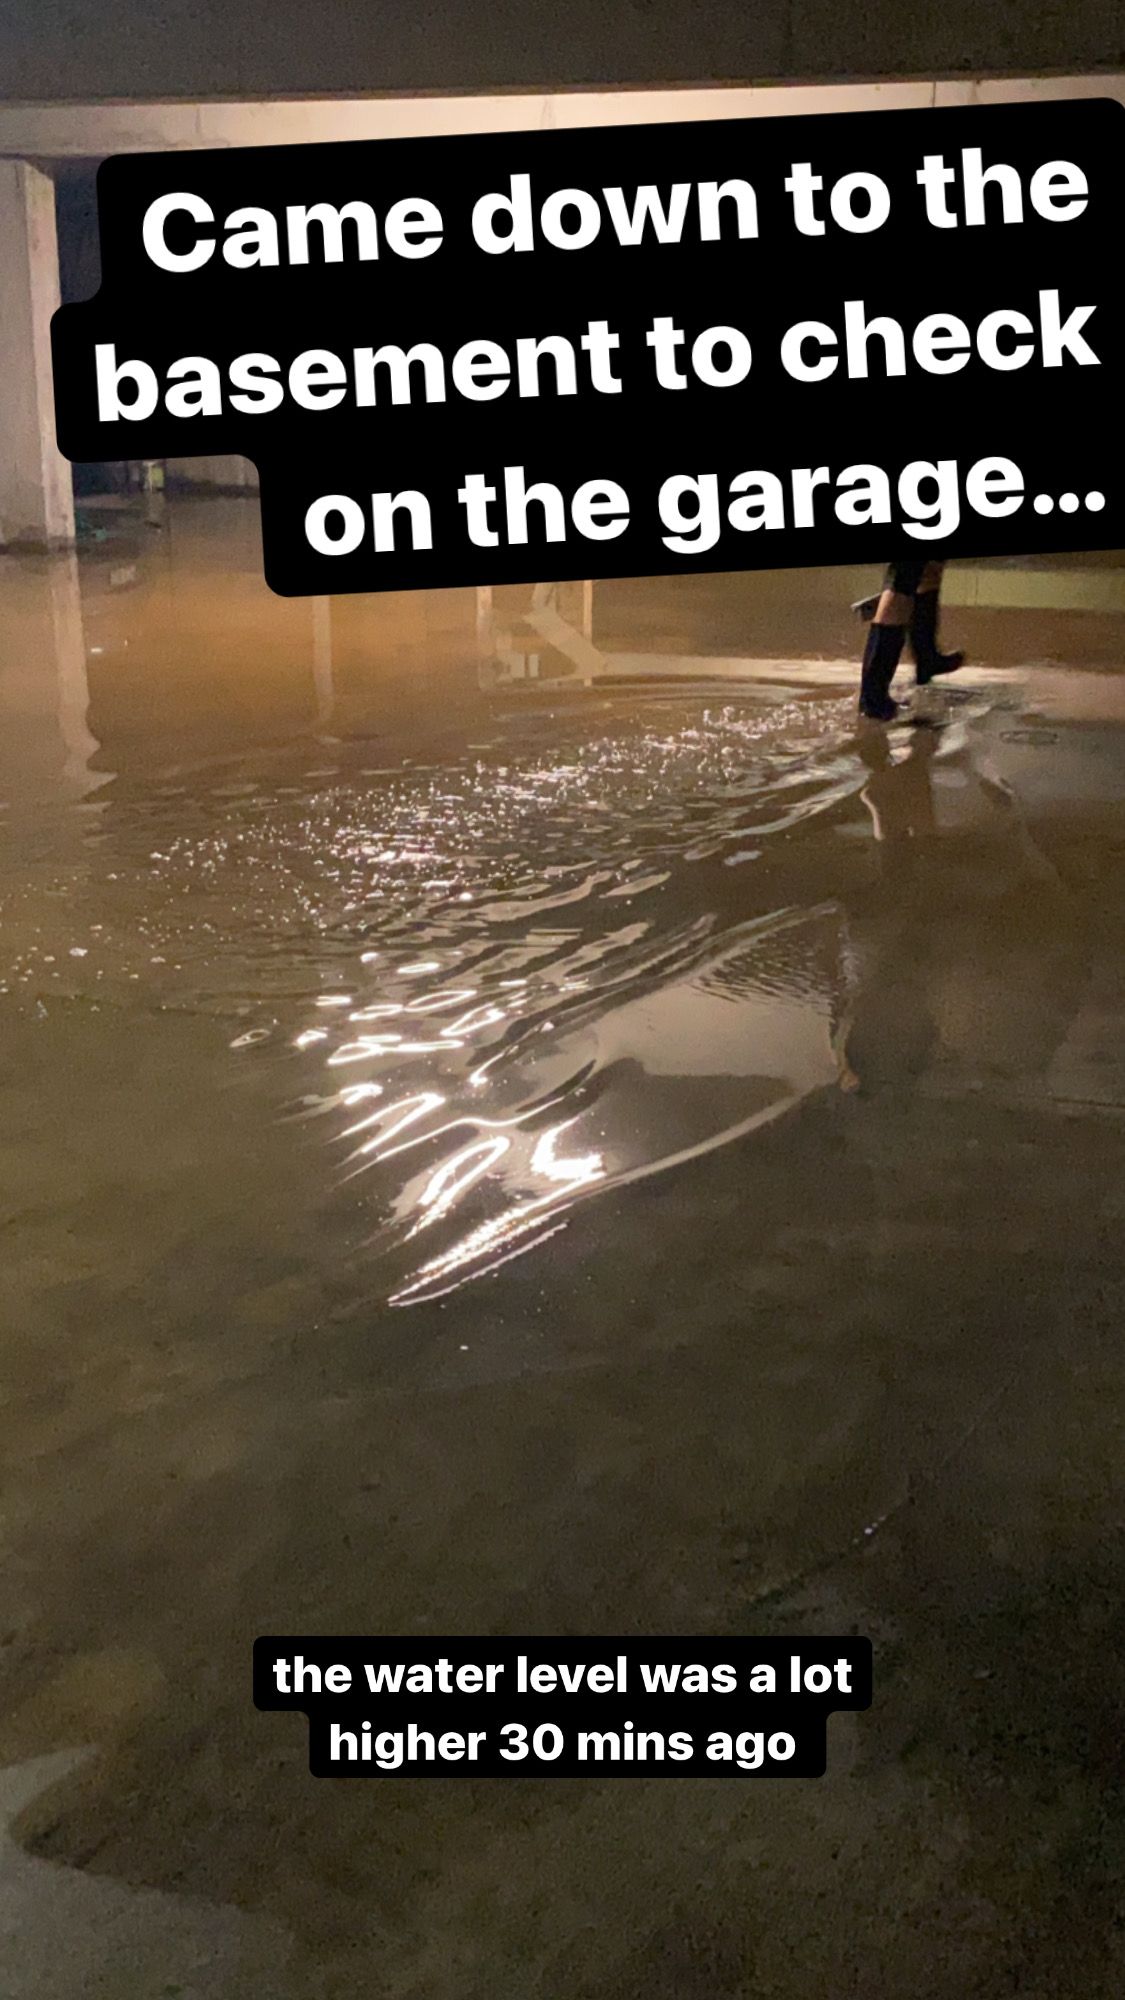 IG story about flooded garage @itsjanicefung